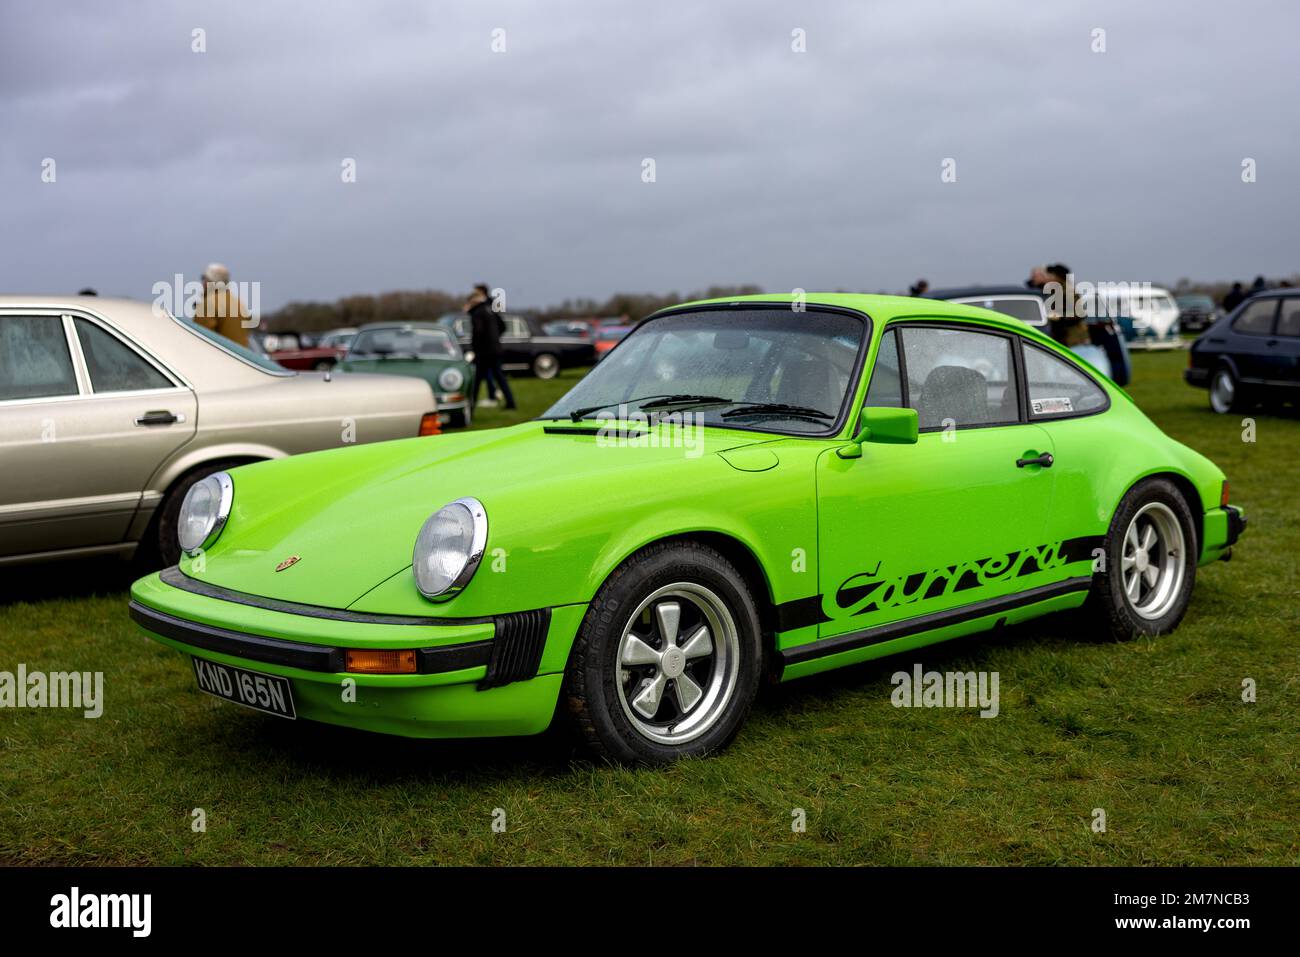 1975 Porsche 911 Carrera  'KND 165N' on display at the January Scramble  held at the Bicester Heritage on the 8th January 2023 Stock Photo - Alamy